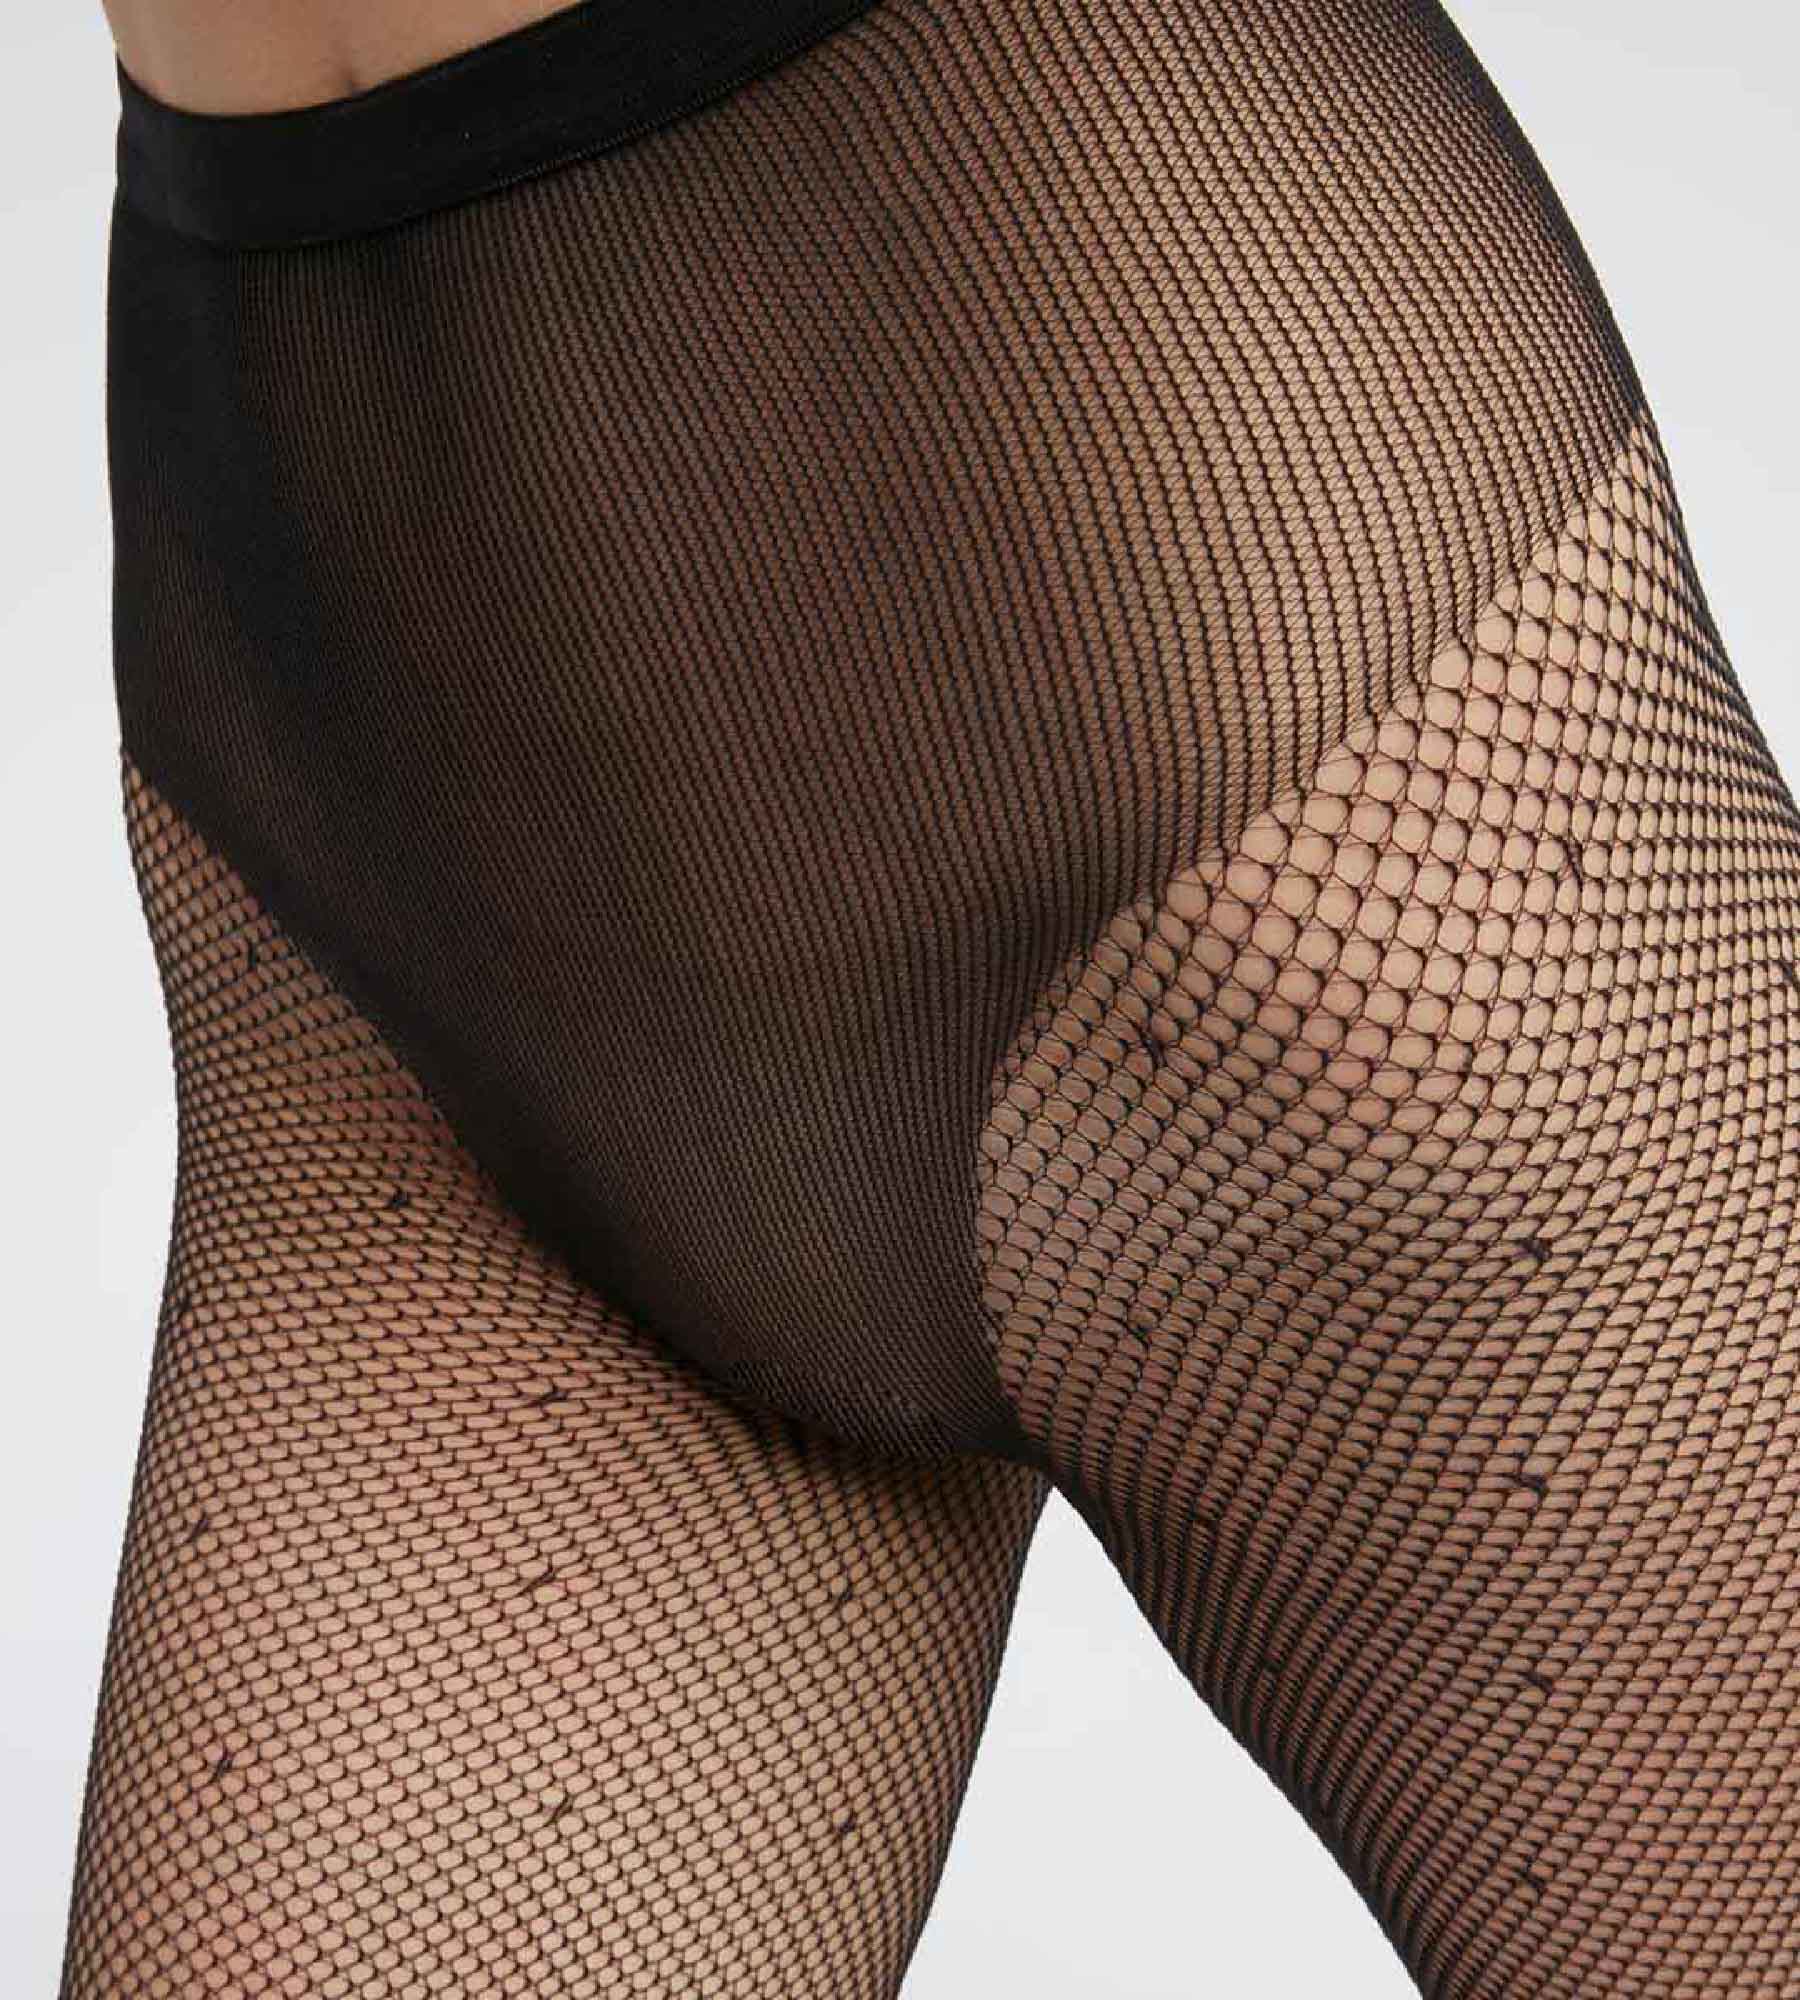 Dim Style women's tights in sheer voile with Burgundy heart prints